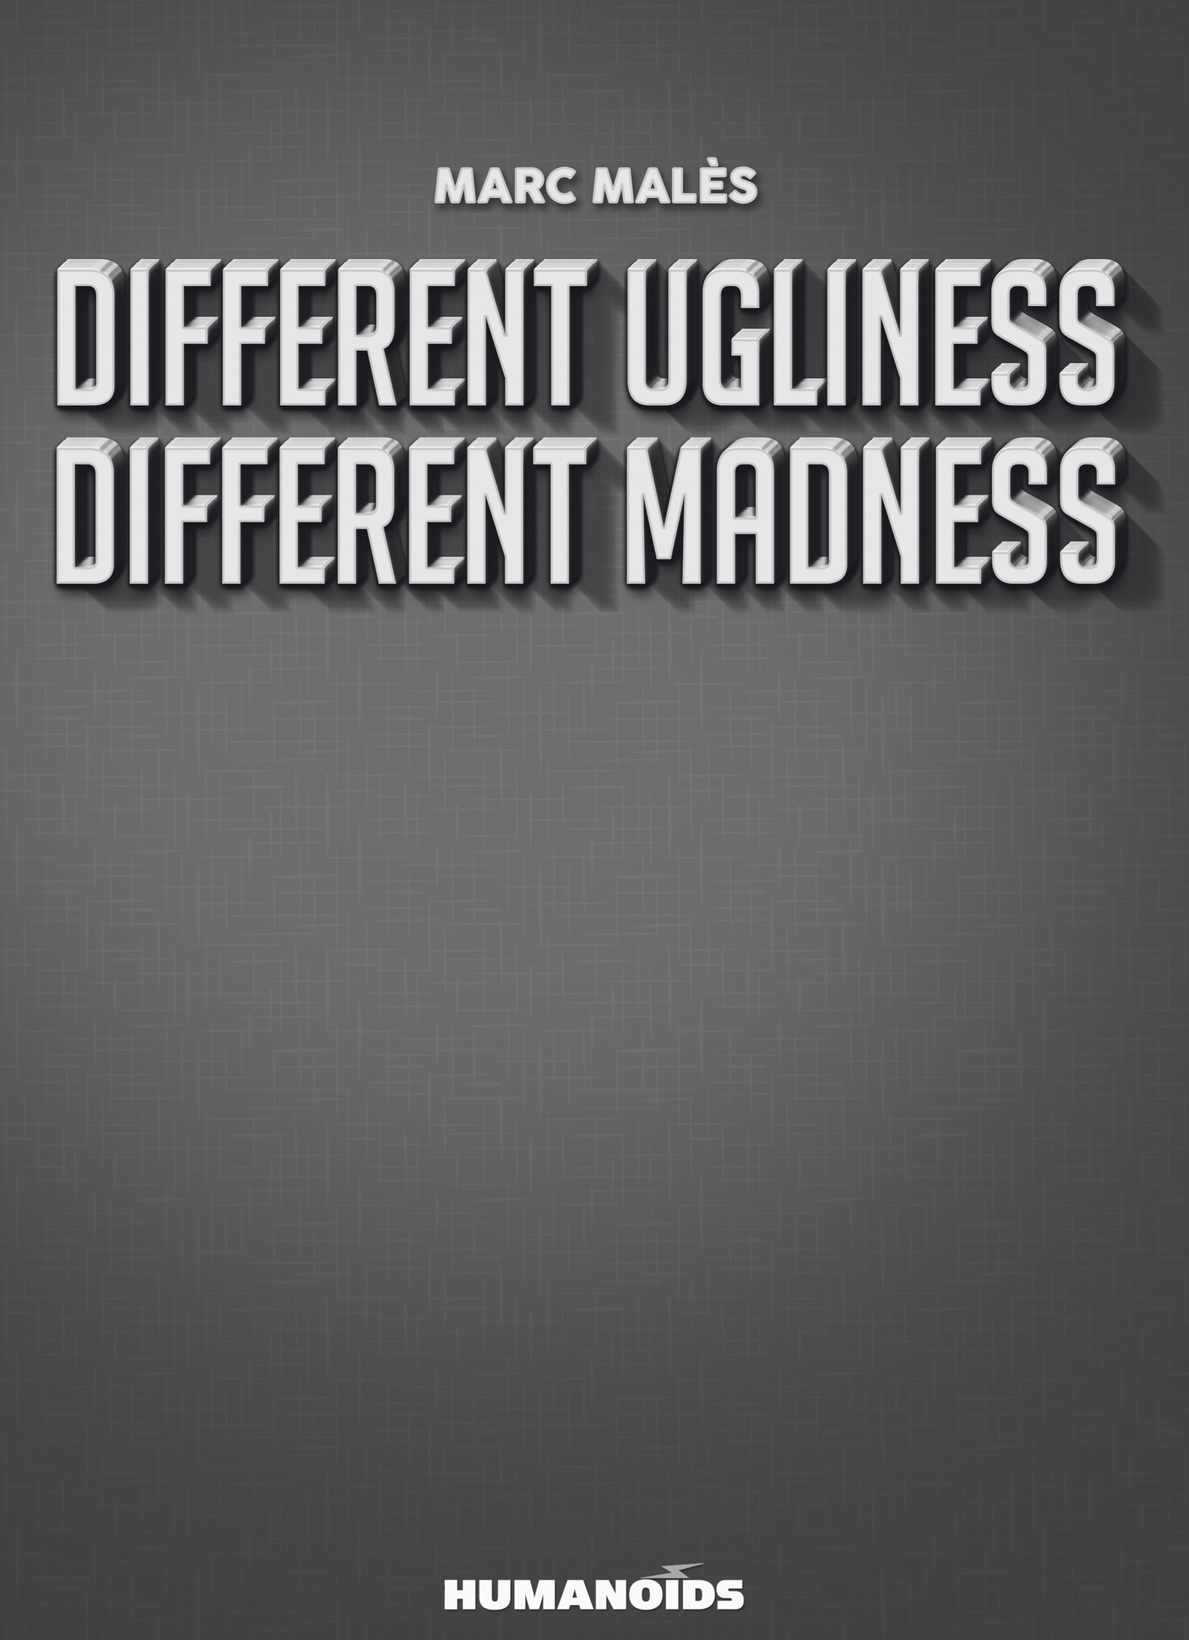 Read online Different Ugliness, Different Madness comic -  Issue # TPB 2 - 1